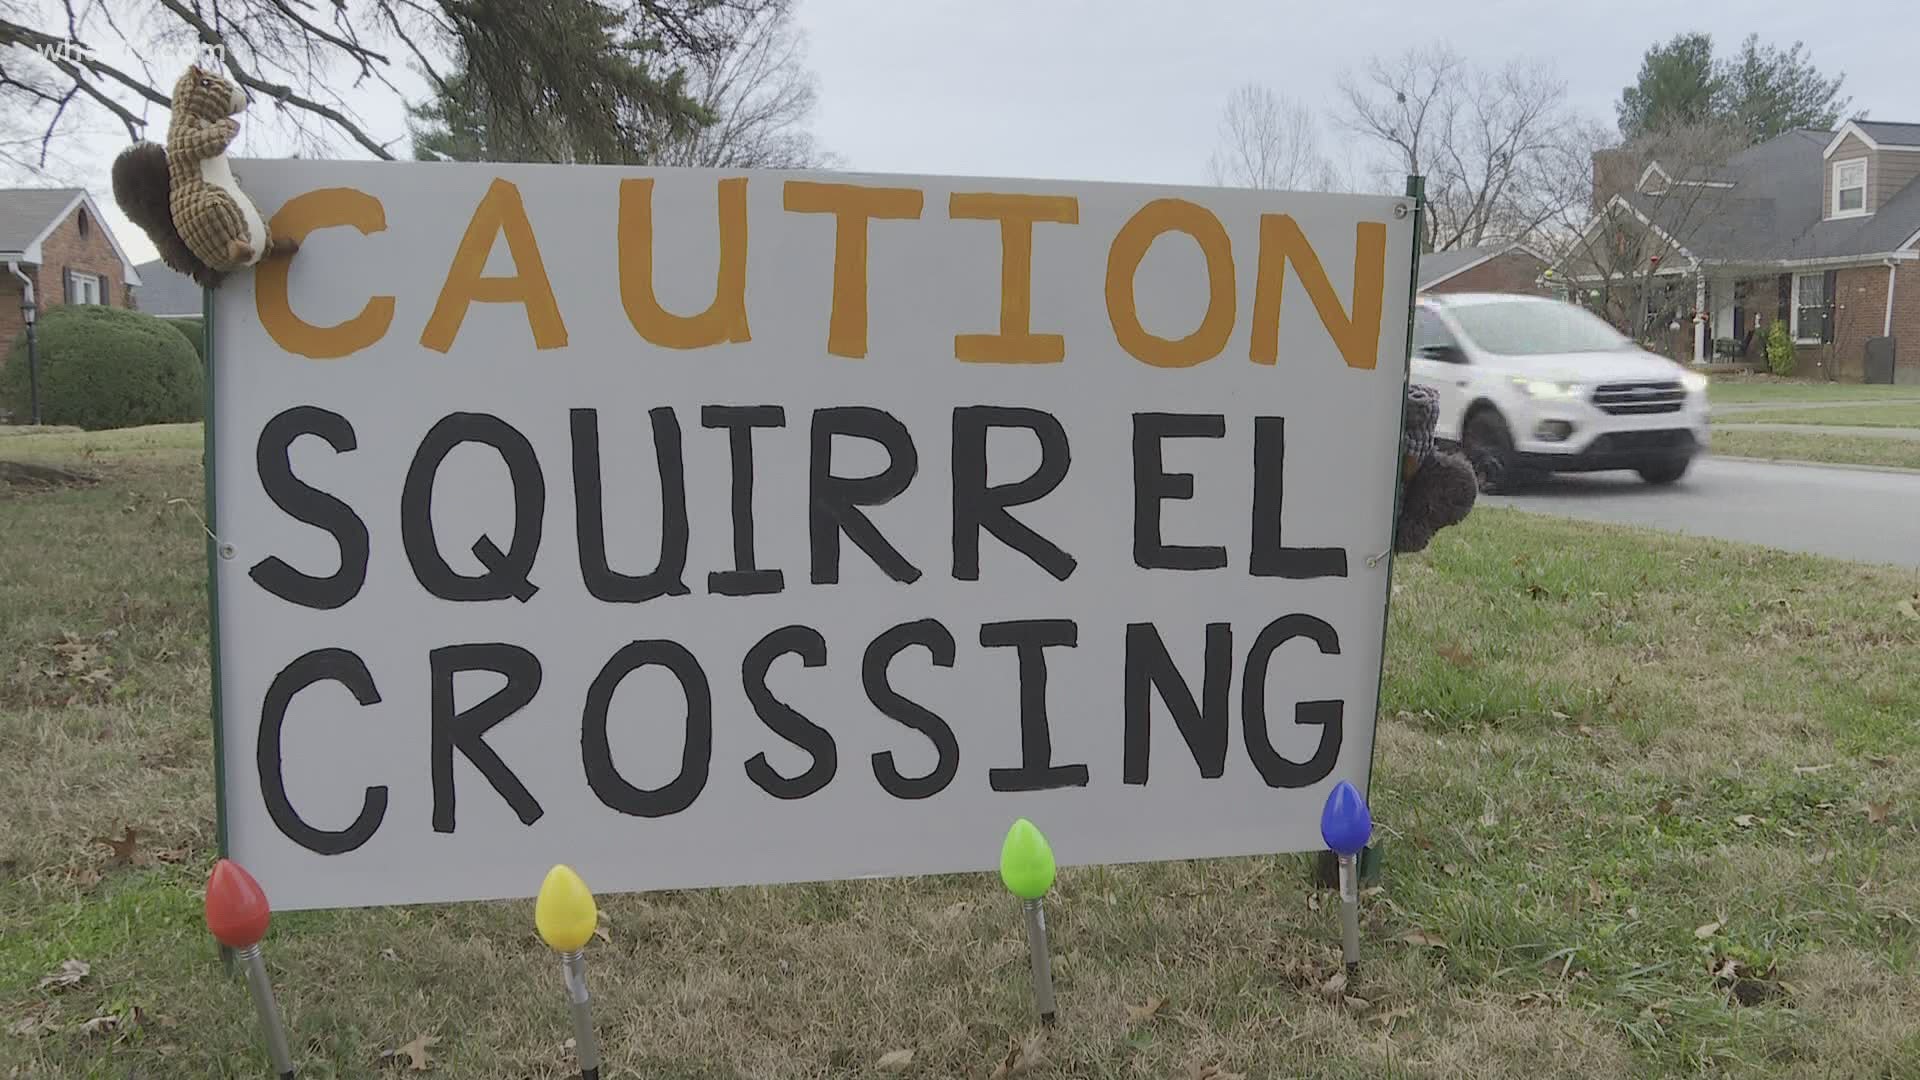 In a high traffic neighborhood in St. Matthews, passersby might think one homeowner is especially nutty for signs in their front yard.